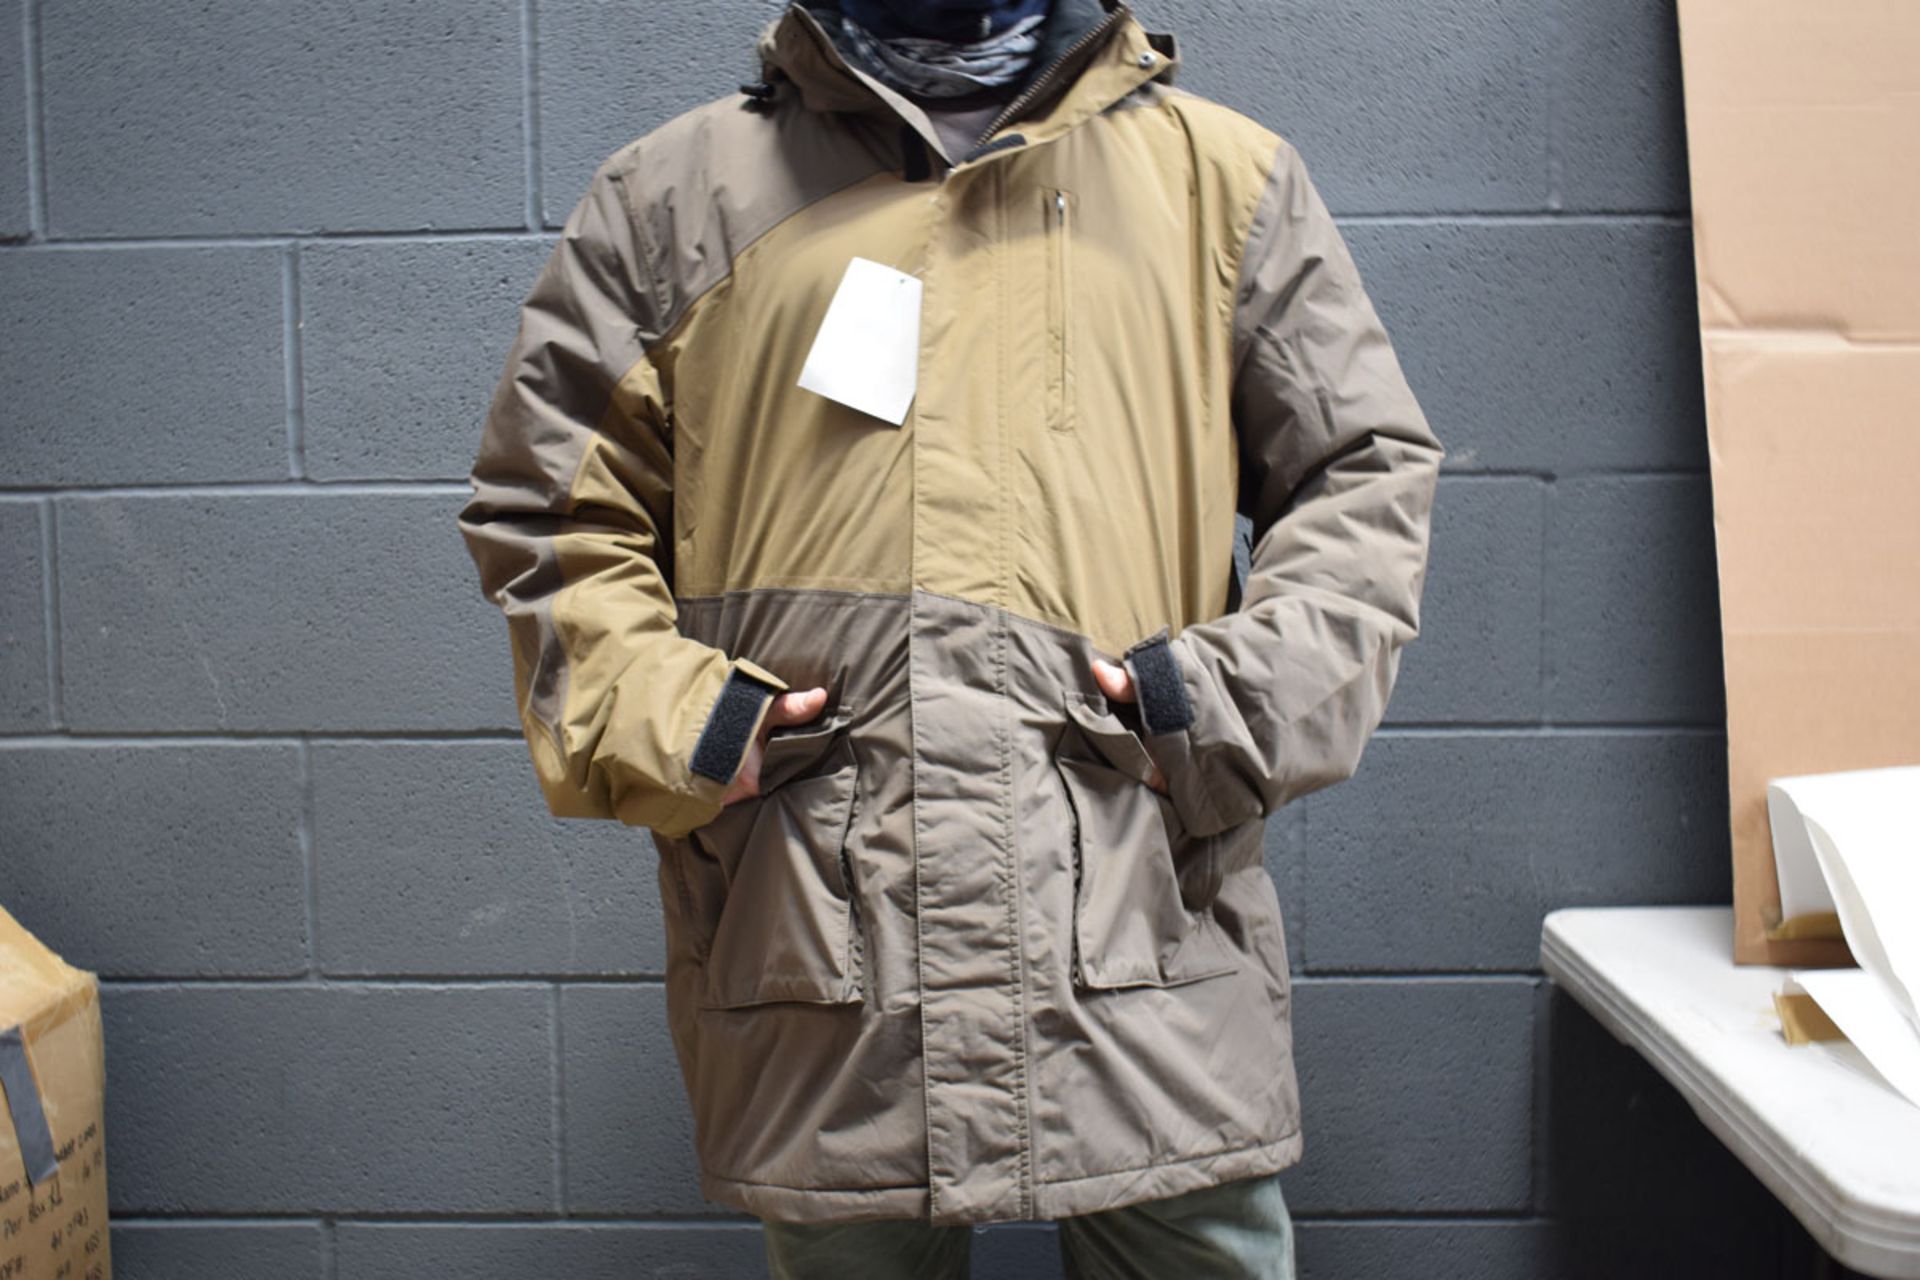 Rod & Gun hooded jacket in two tone brown, size M